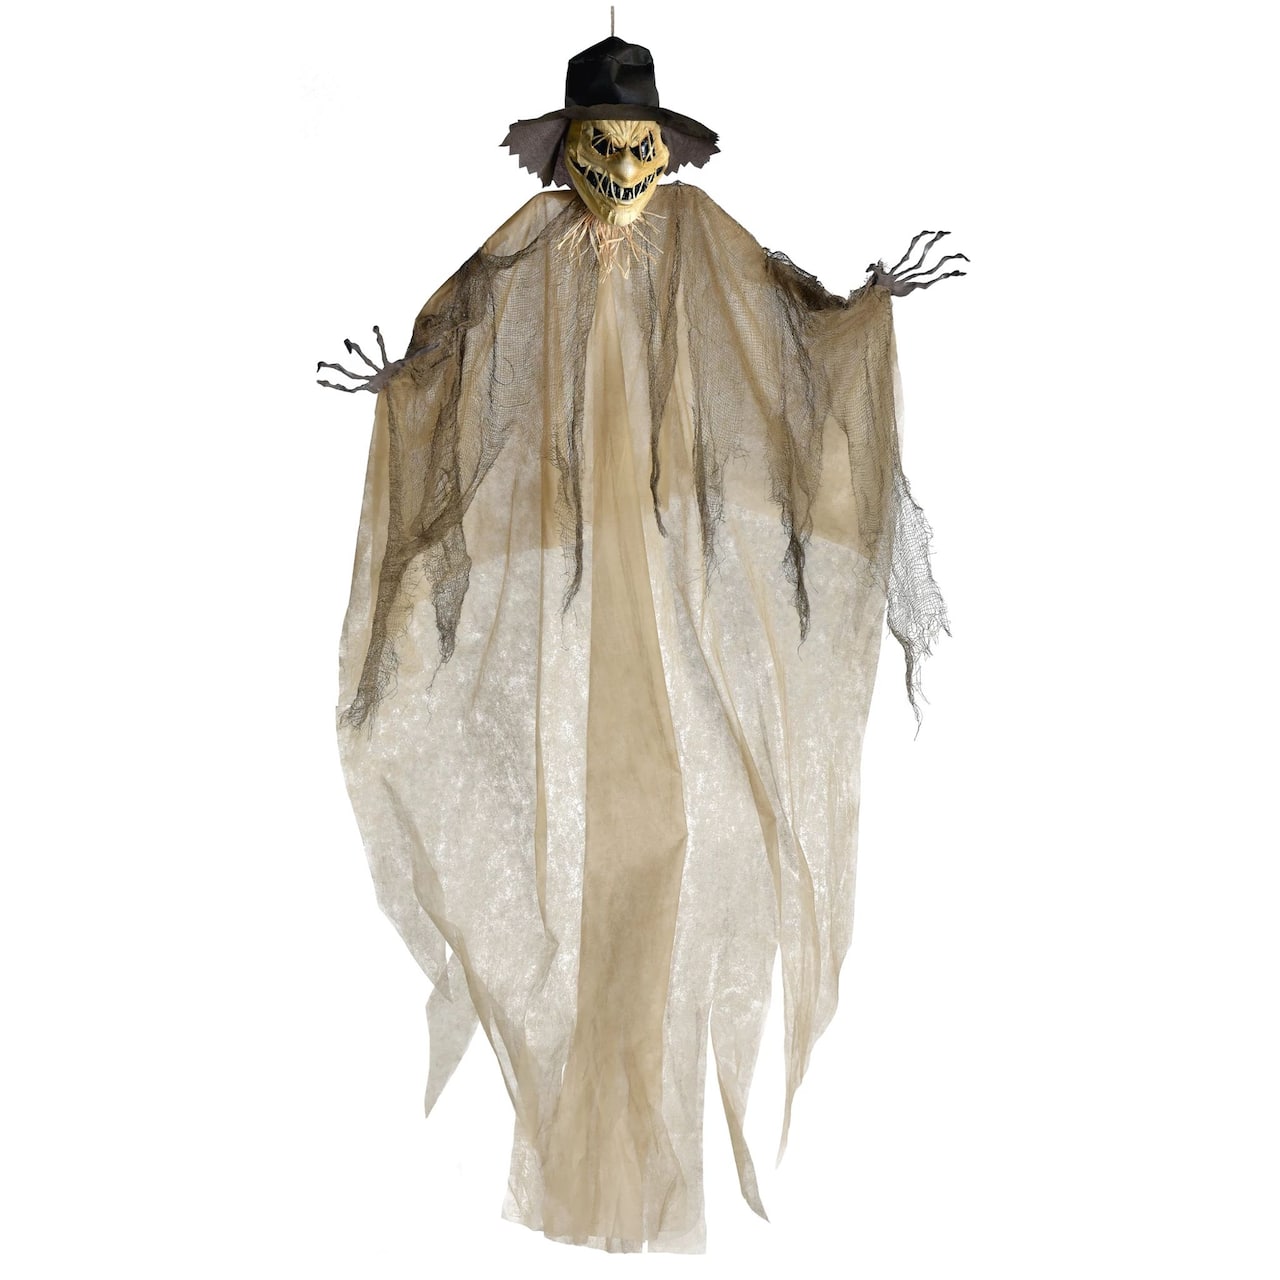 7ft. Halloween Scary Scarecrow Hanging Prop